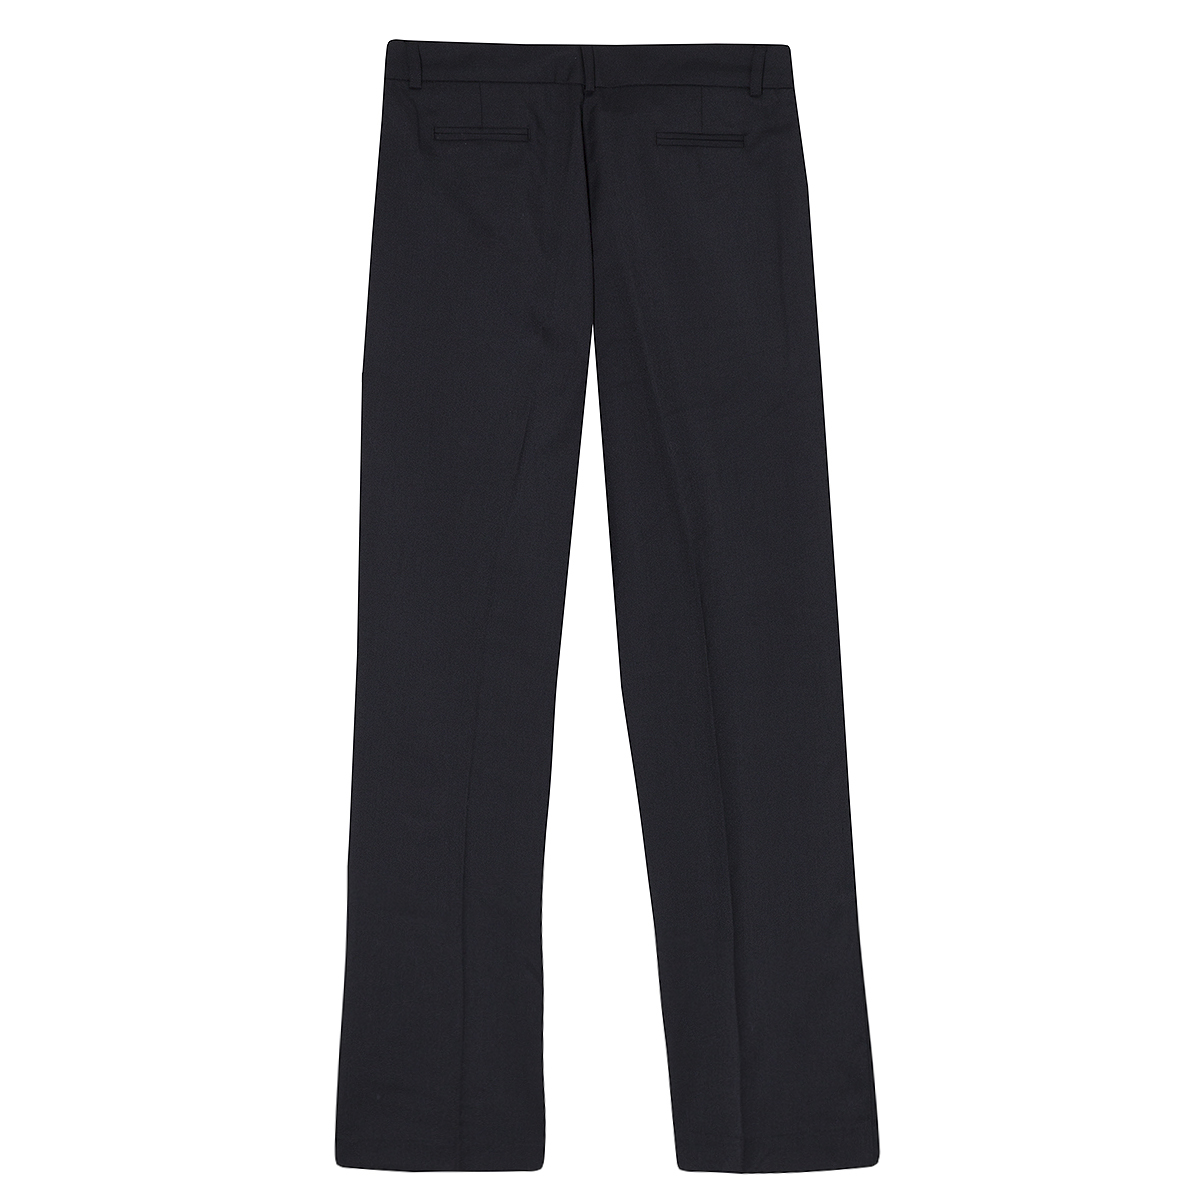 Ladies Womens Work Trousers Business Office Formal Straight Leg Pants ...